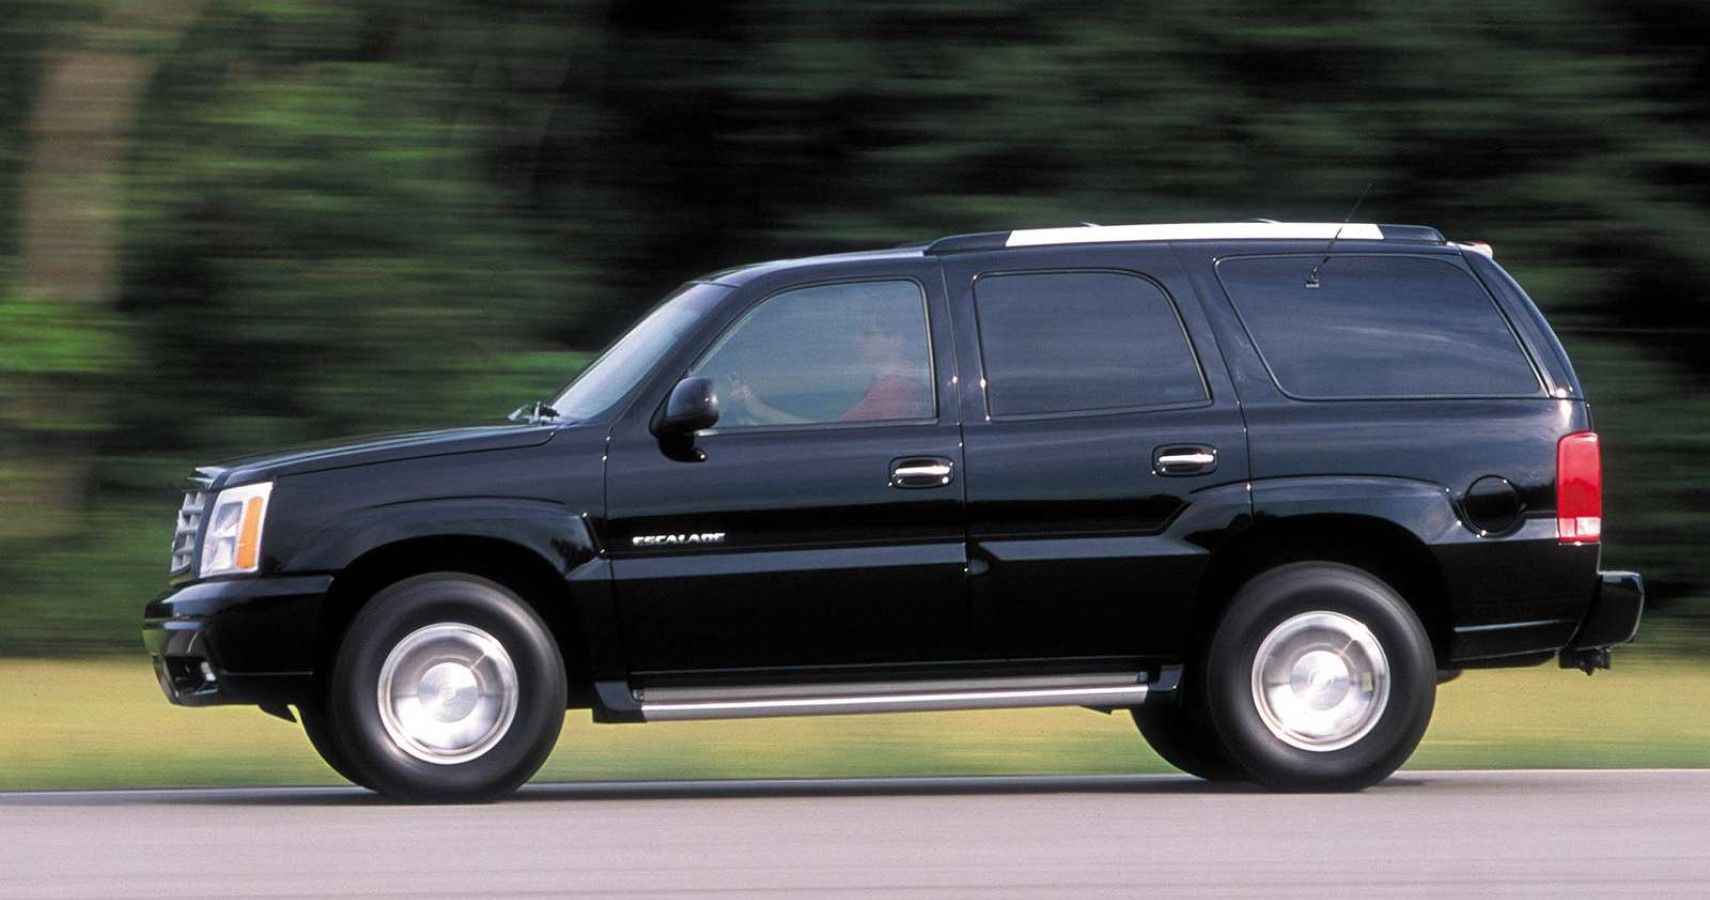 Second generation Cadillac Escalade accelerating side view